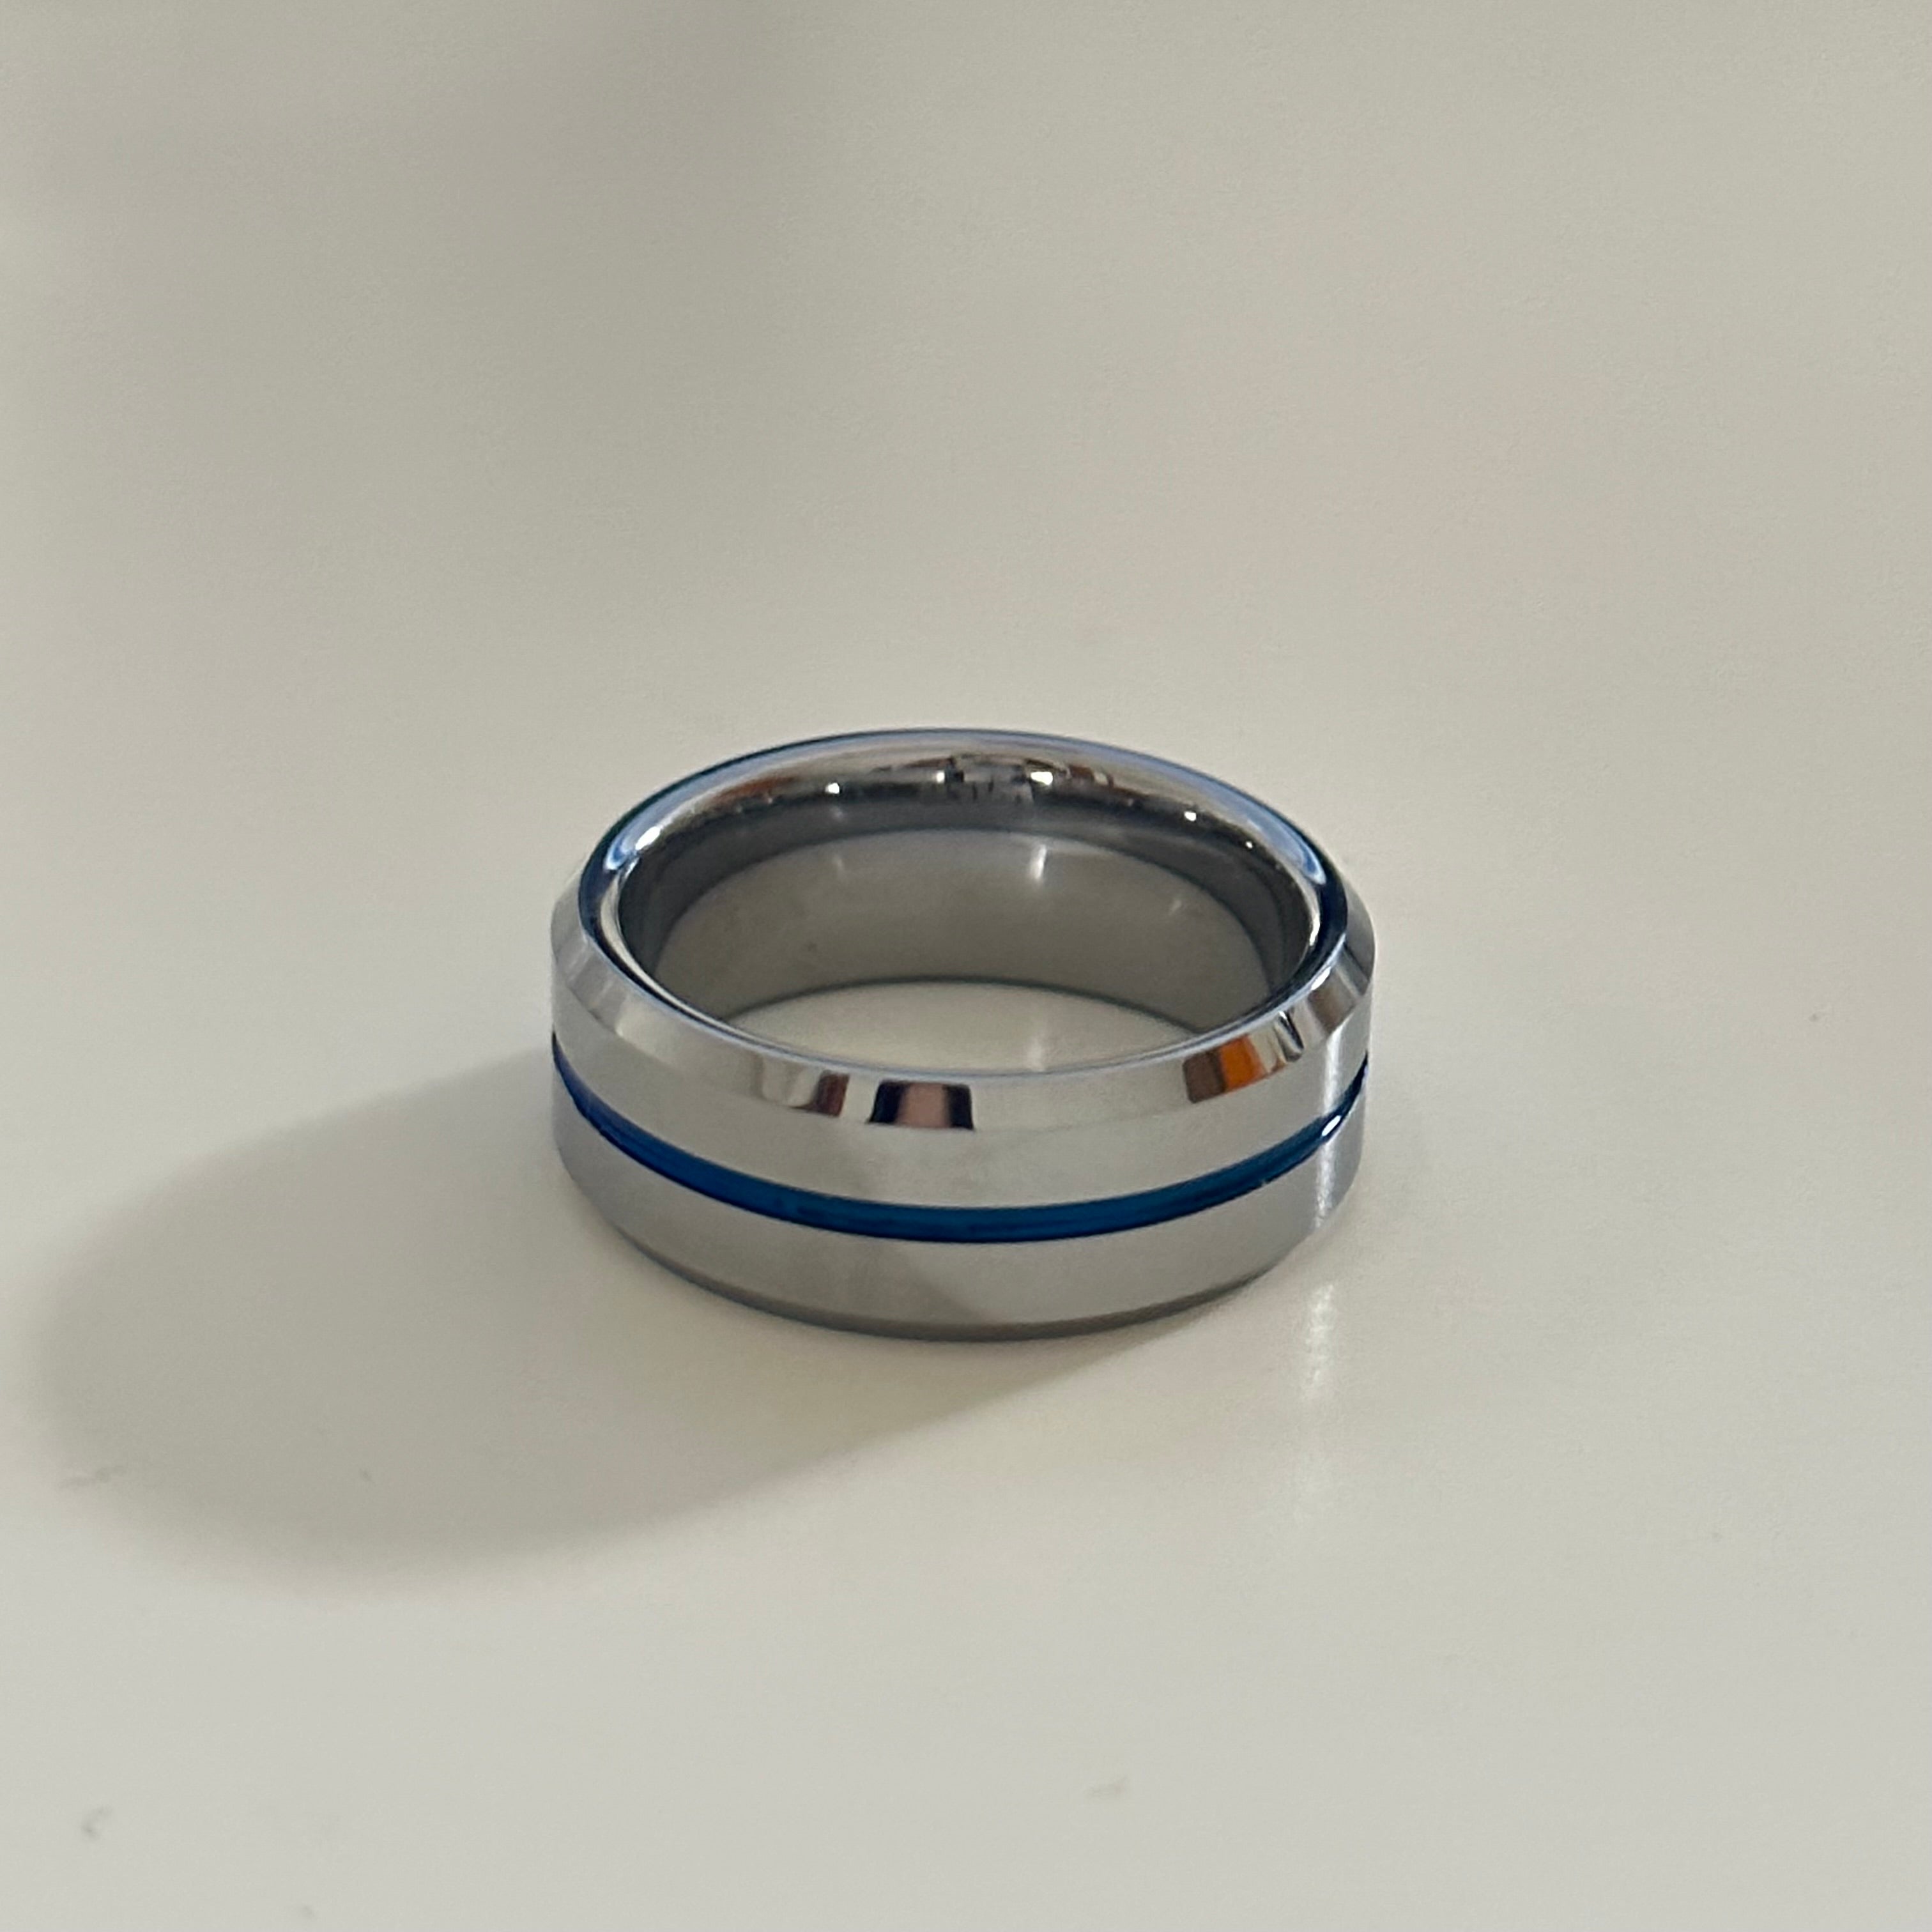 Silver Tungsten Ring with a Blue Band - The Neptune Band